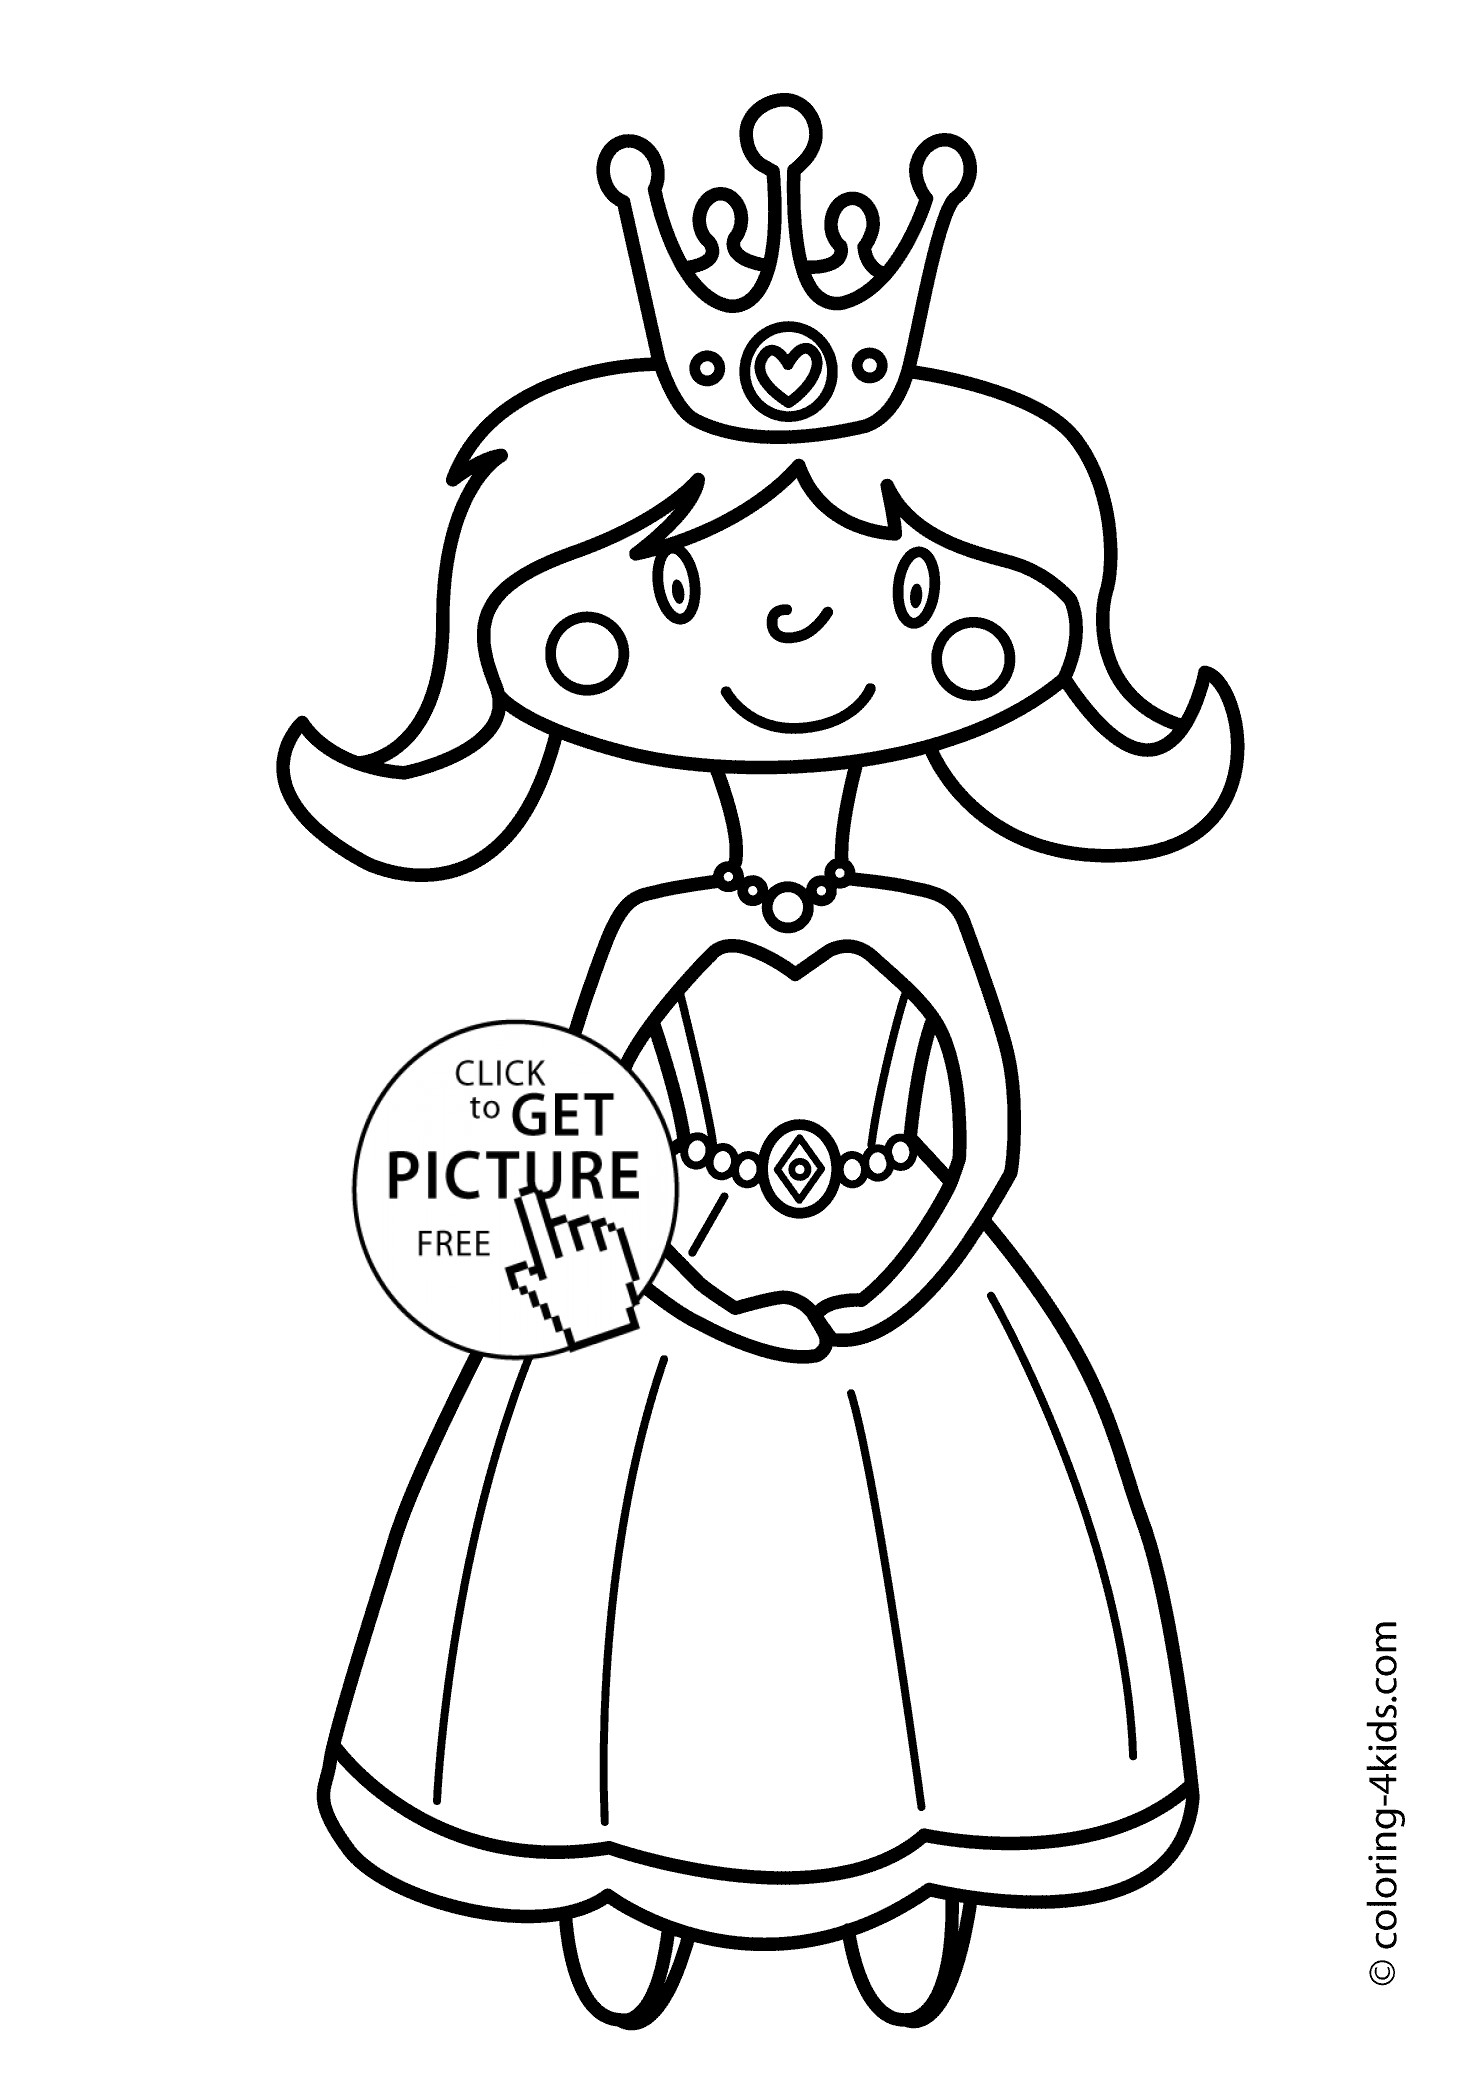 Free Printable Coloring Pages For Girls
 Cute Princesse Coloring pages for girls printable